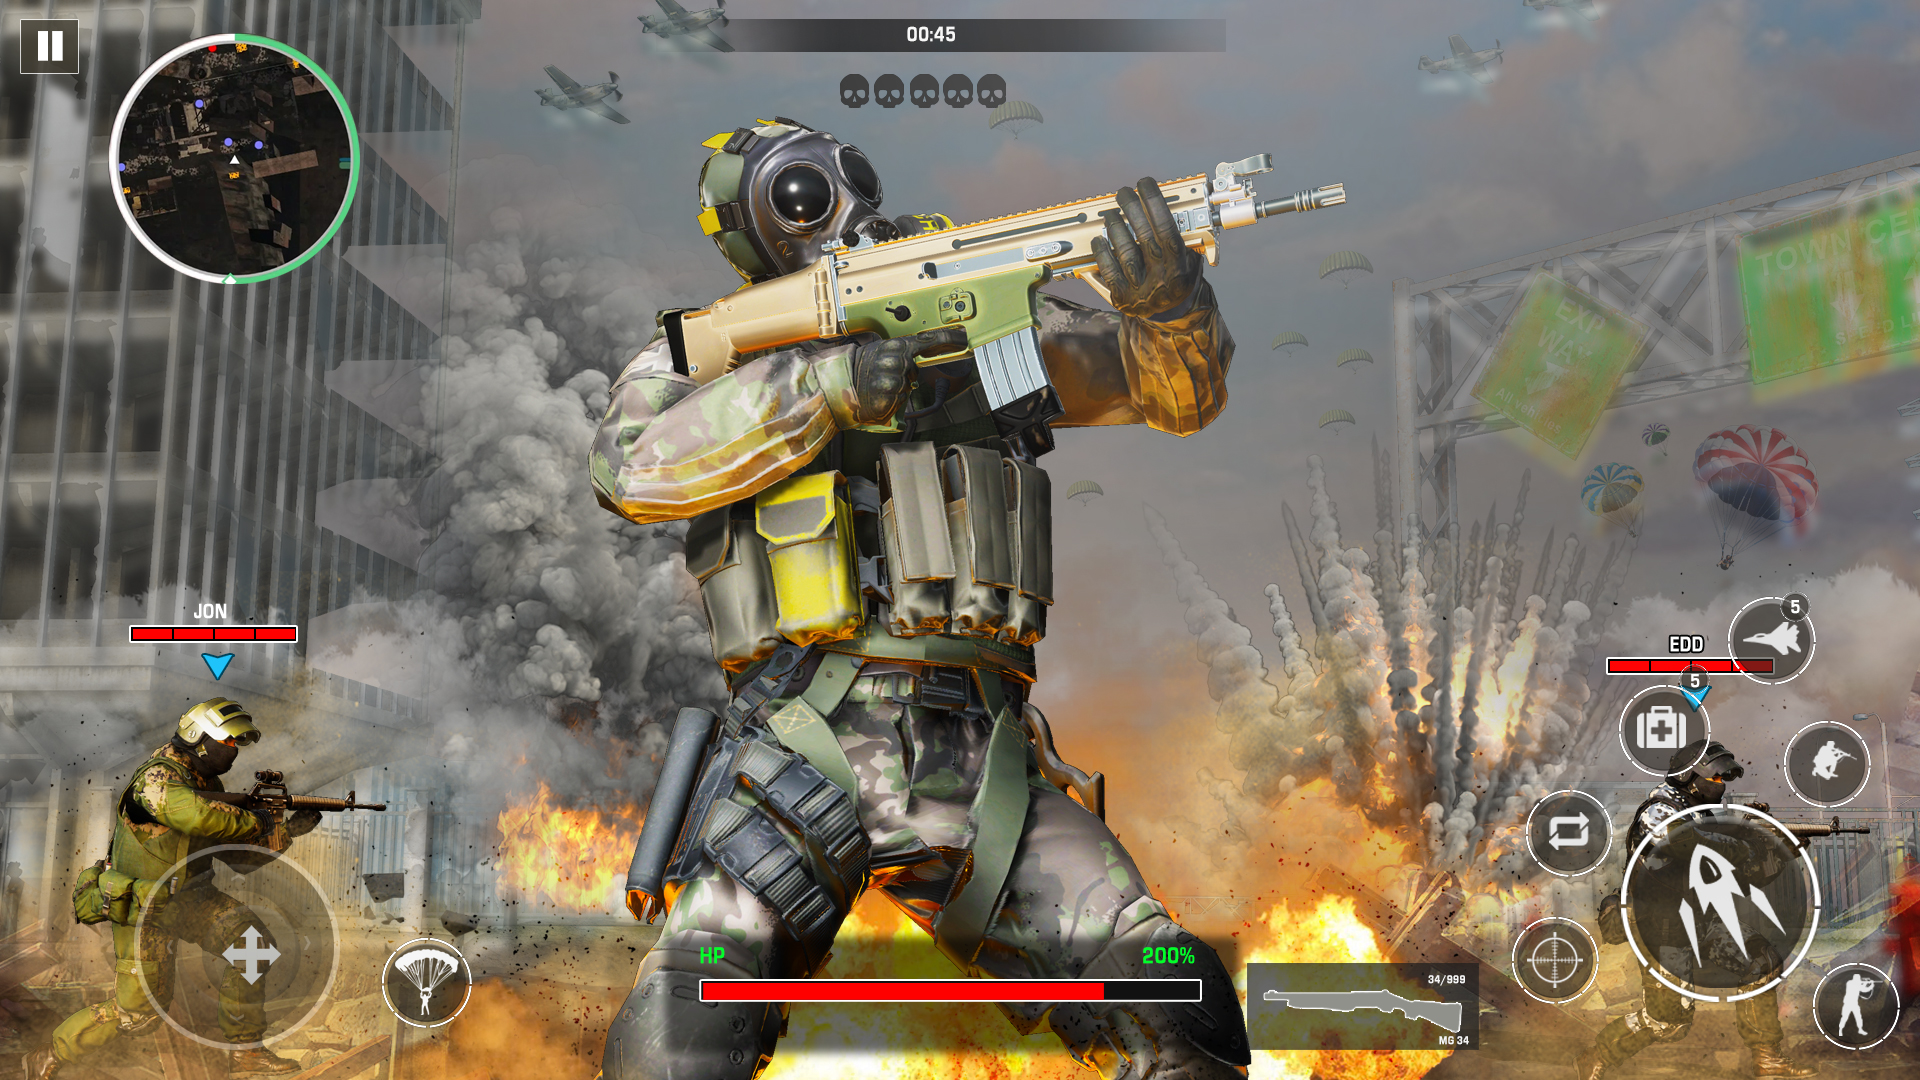 Download Cover Strike FPS Shooting Game on PC with MEmu